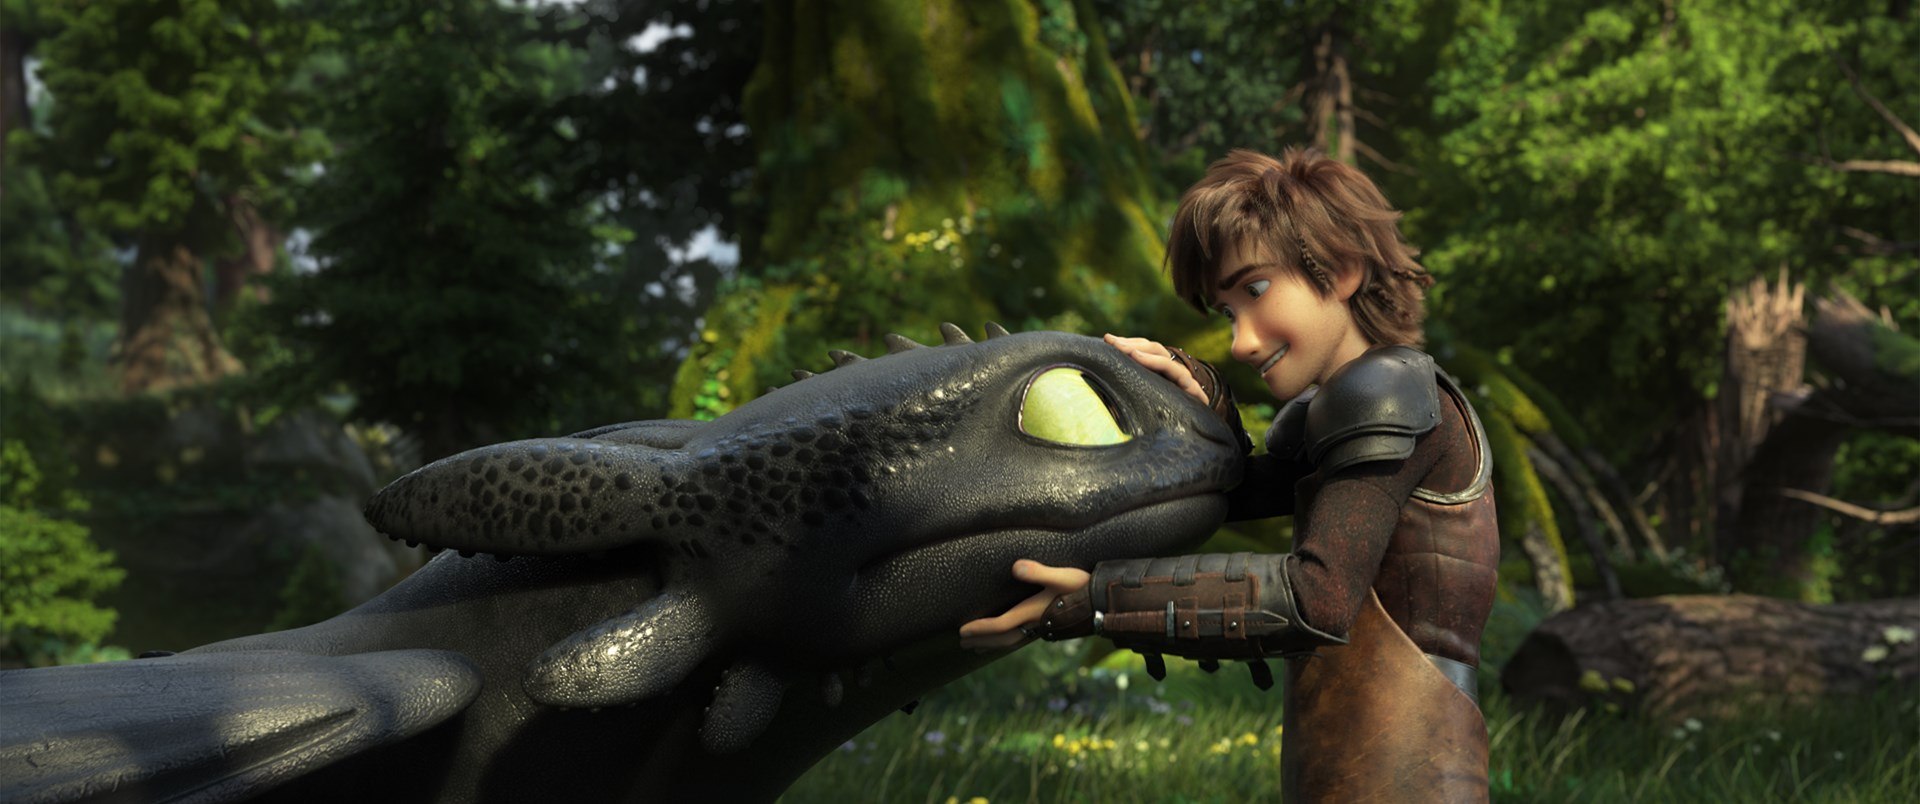 how to train your dragon the hidden world film images